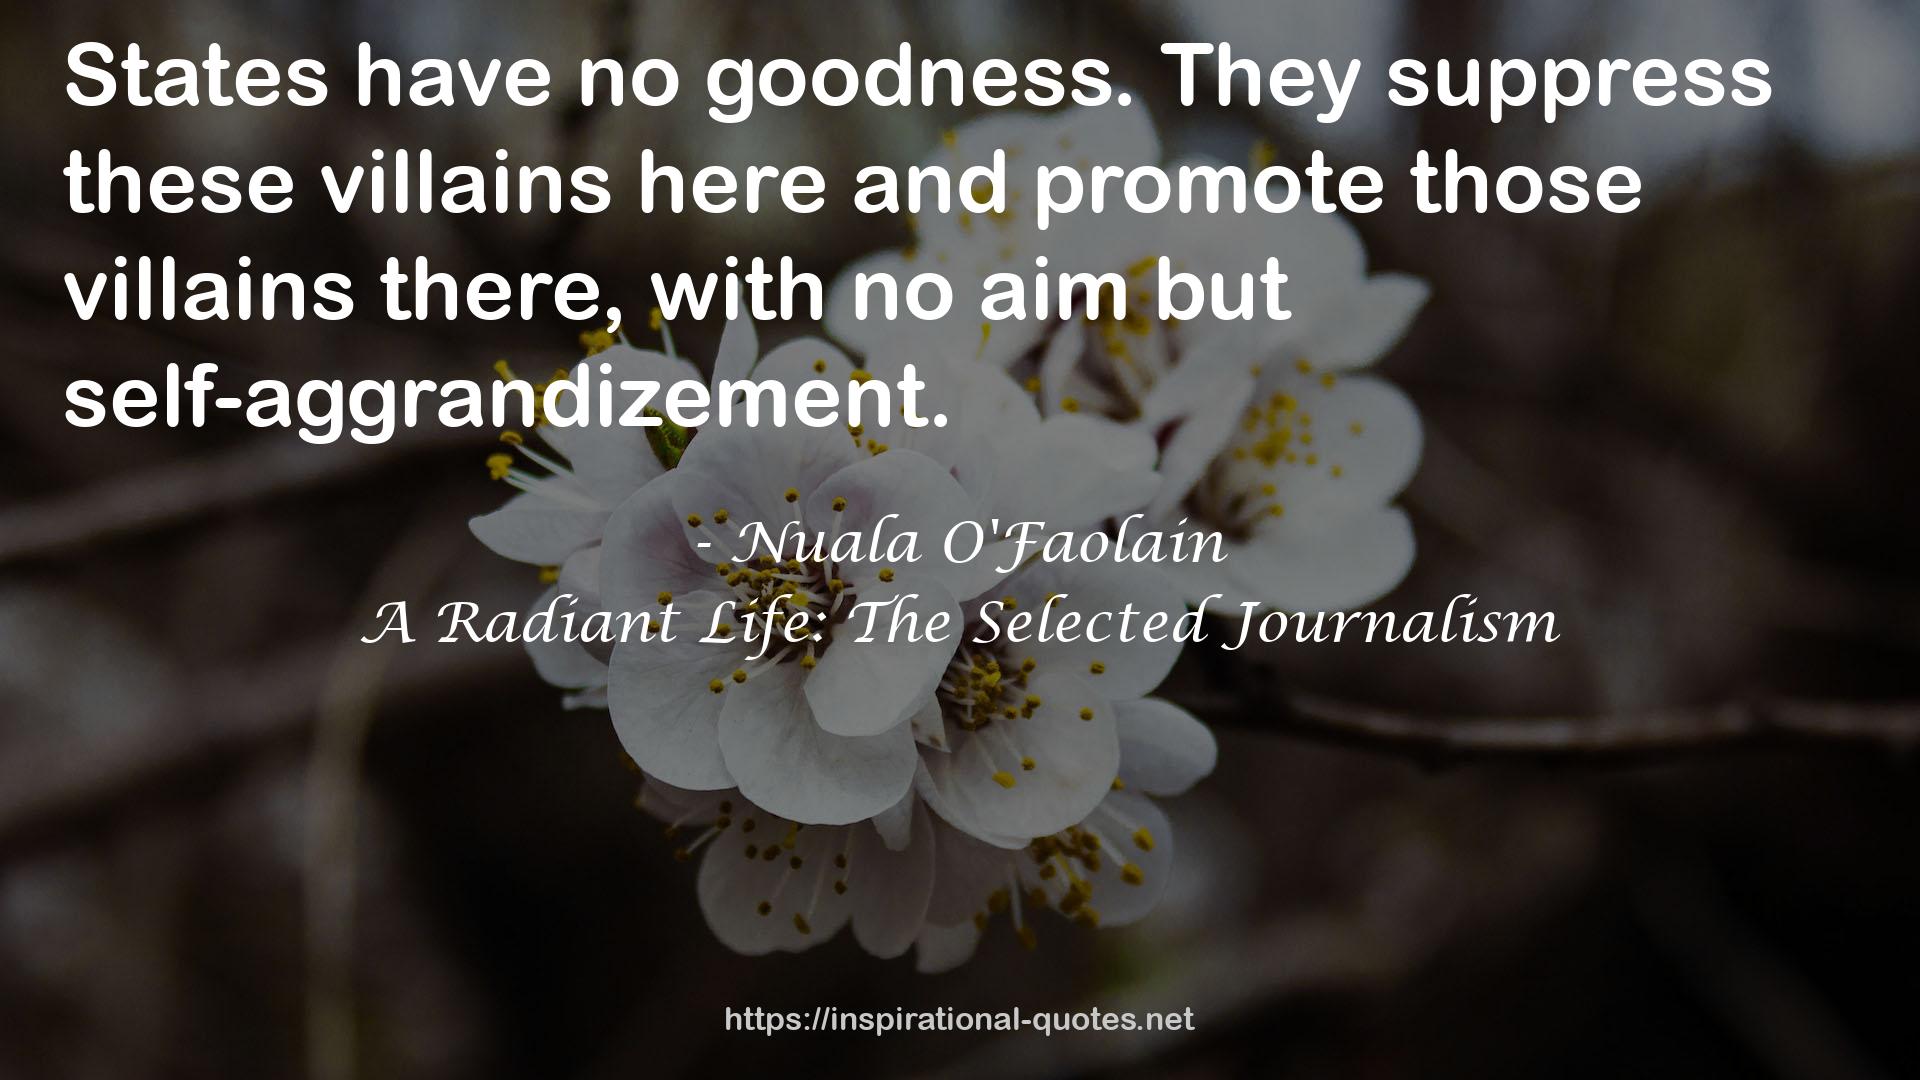 A Radiant Life: The Selected Journalism QUOTES